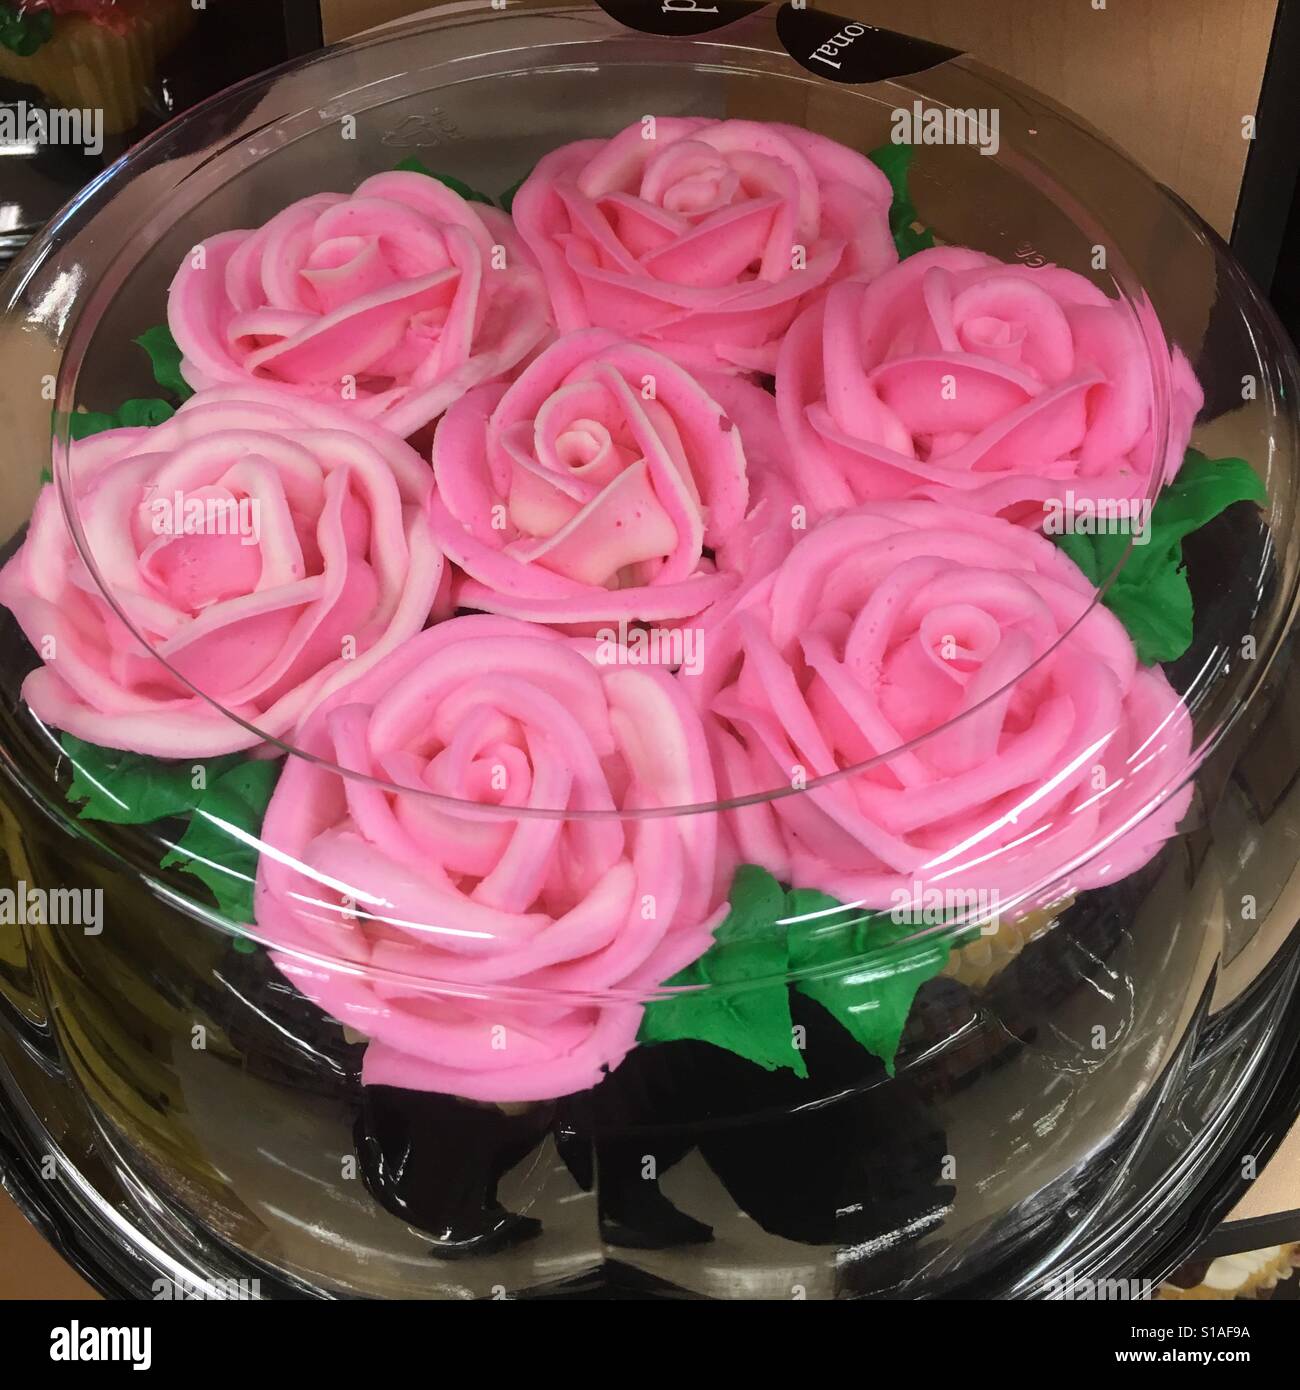 Pink rose cake frosting Stock Photo